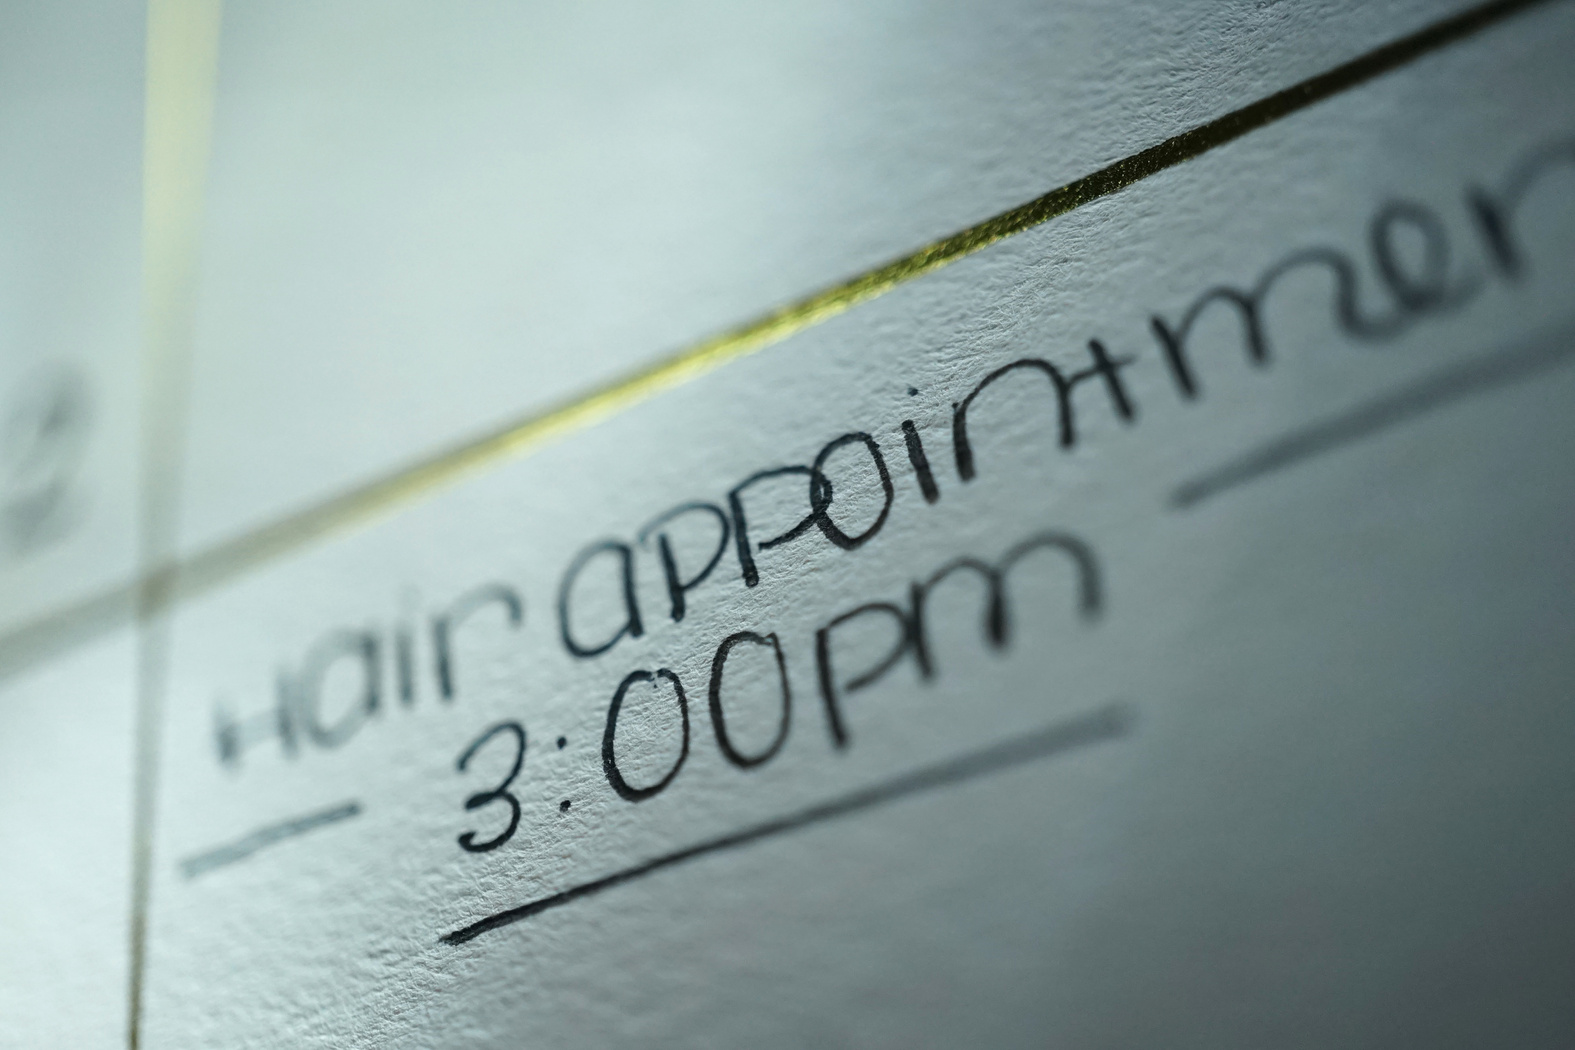 hair appointment in calendar